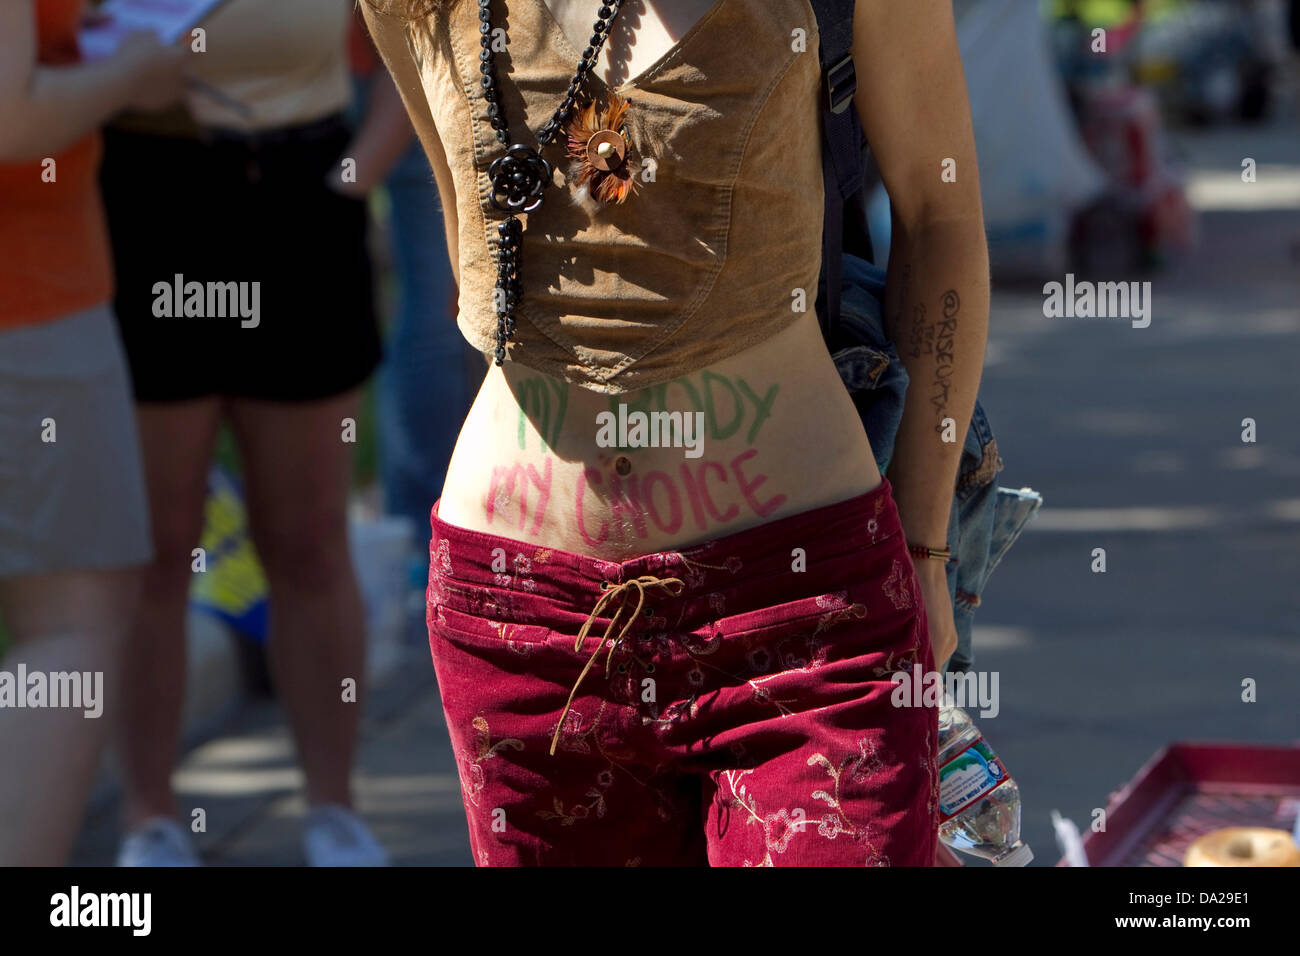 Pro-choice activist has 'My Body My Choice' slogan painted on her body at a rally at Texas Capital protesting new law relating to abortion restrictions Stock Photo